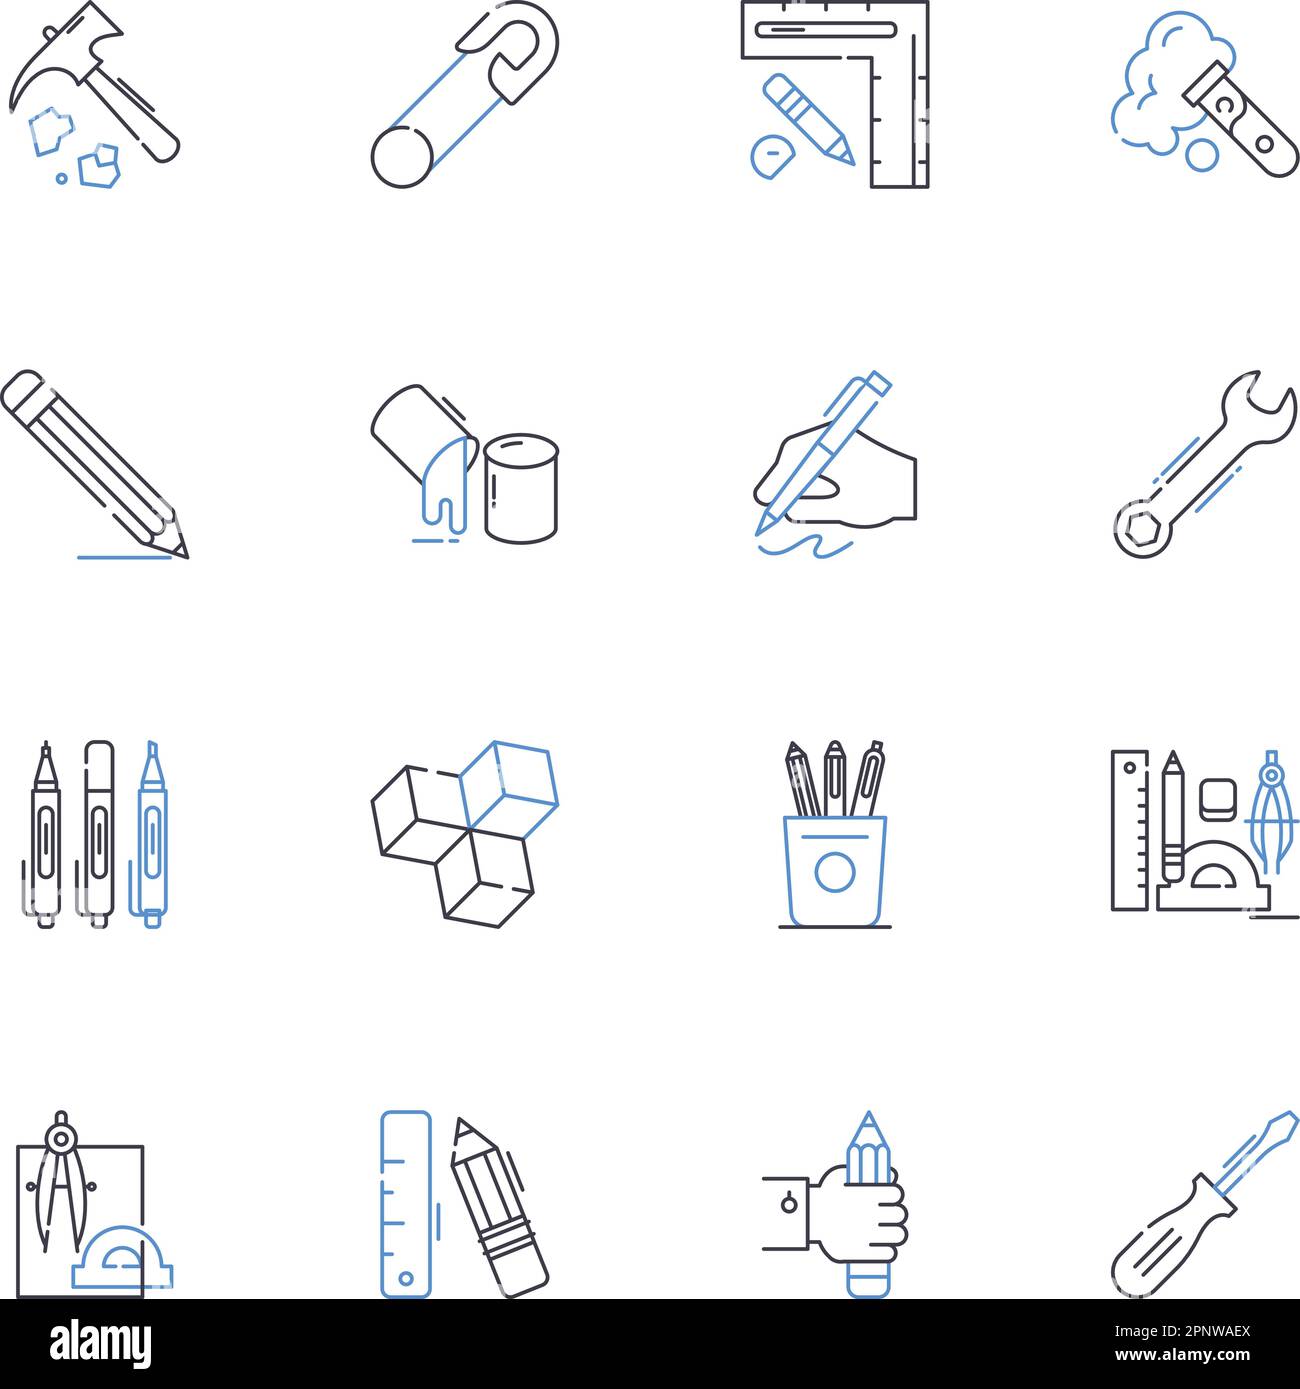 Implements line icons collection. Tools, Equipment, Devices, Instruments, Apparatus, Machines, Gadgets vector and linear illustration. Utensils Stock Vector